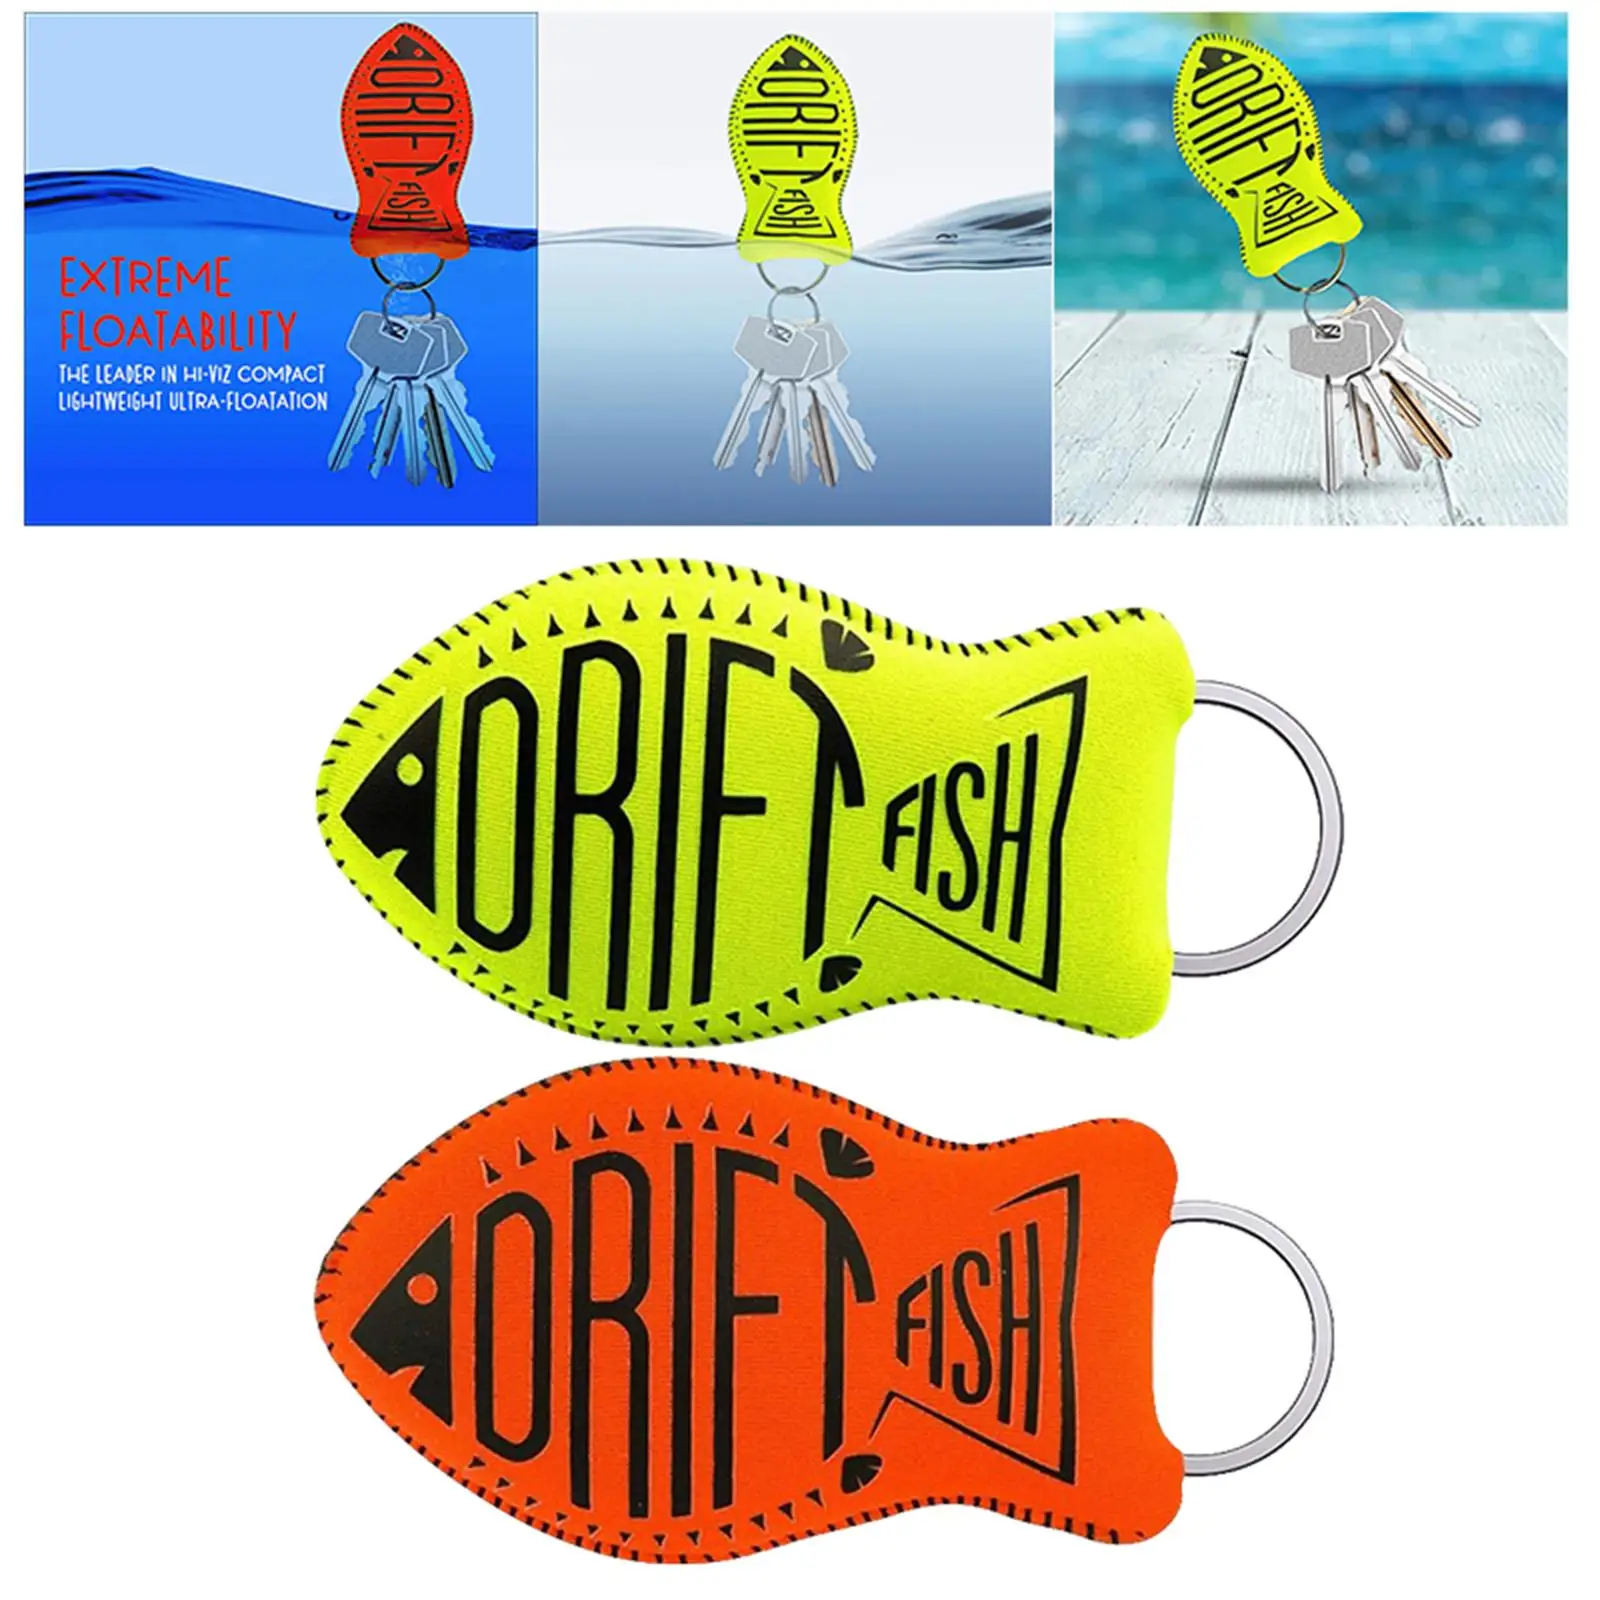 Floating Keychain Waterproof Water Sport Accessories Pendant Portable Glow in The darks key Chain for Outdoor Sports Fishing